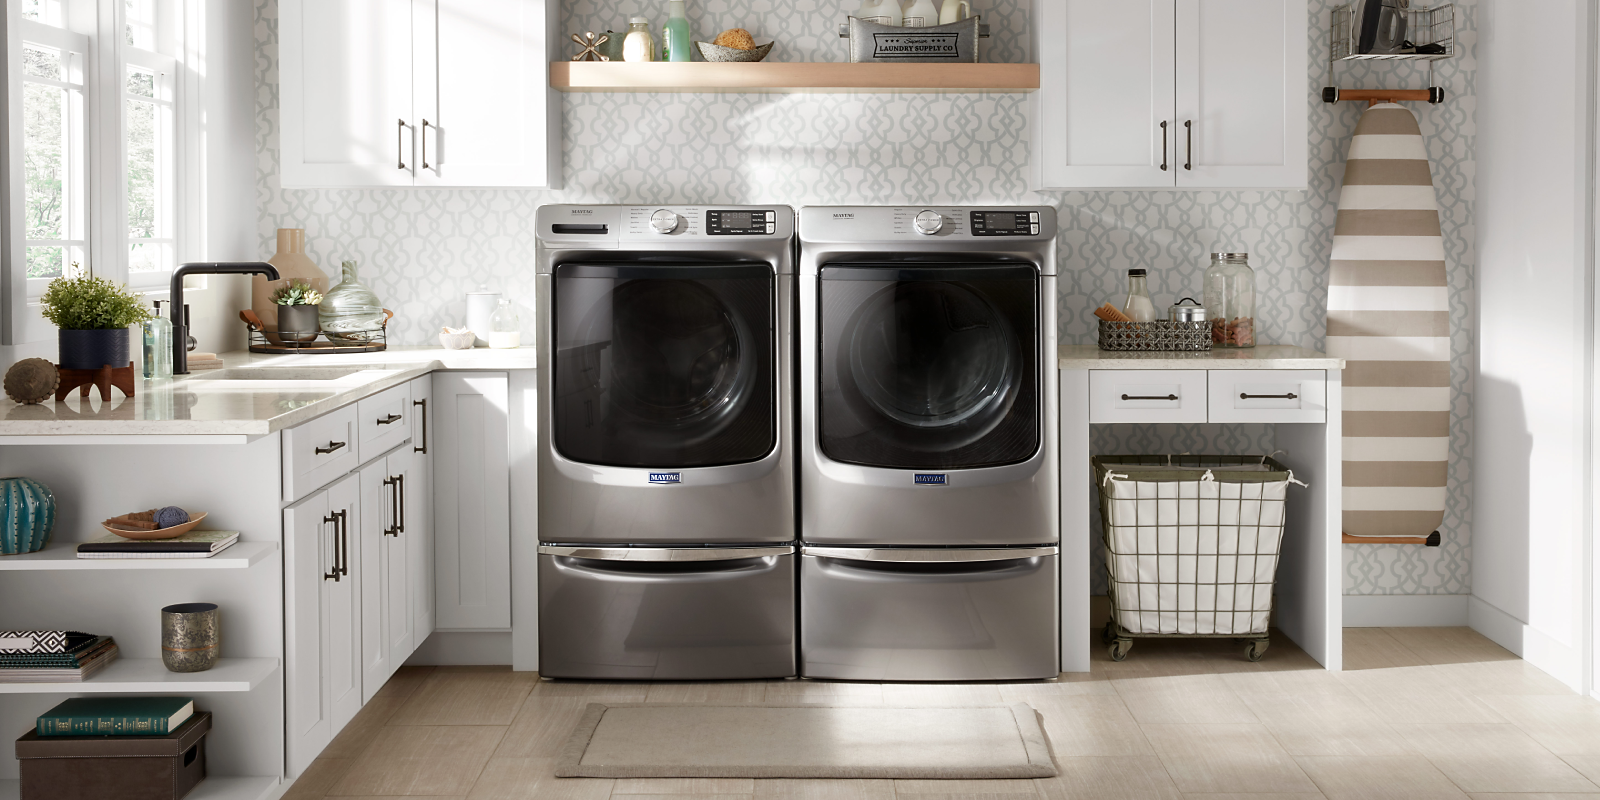 Stainless steel Maytag® washer and dryer in a modern laundry room